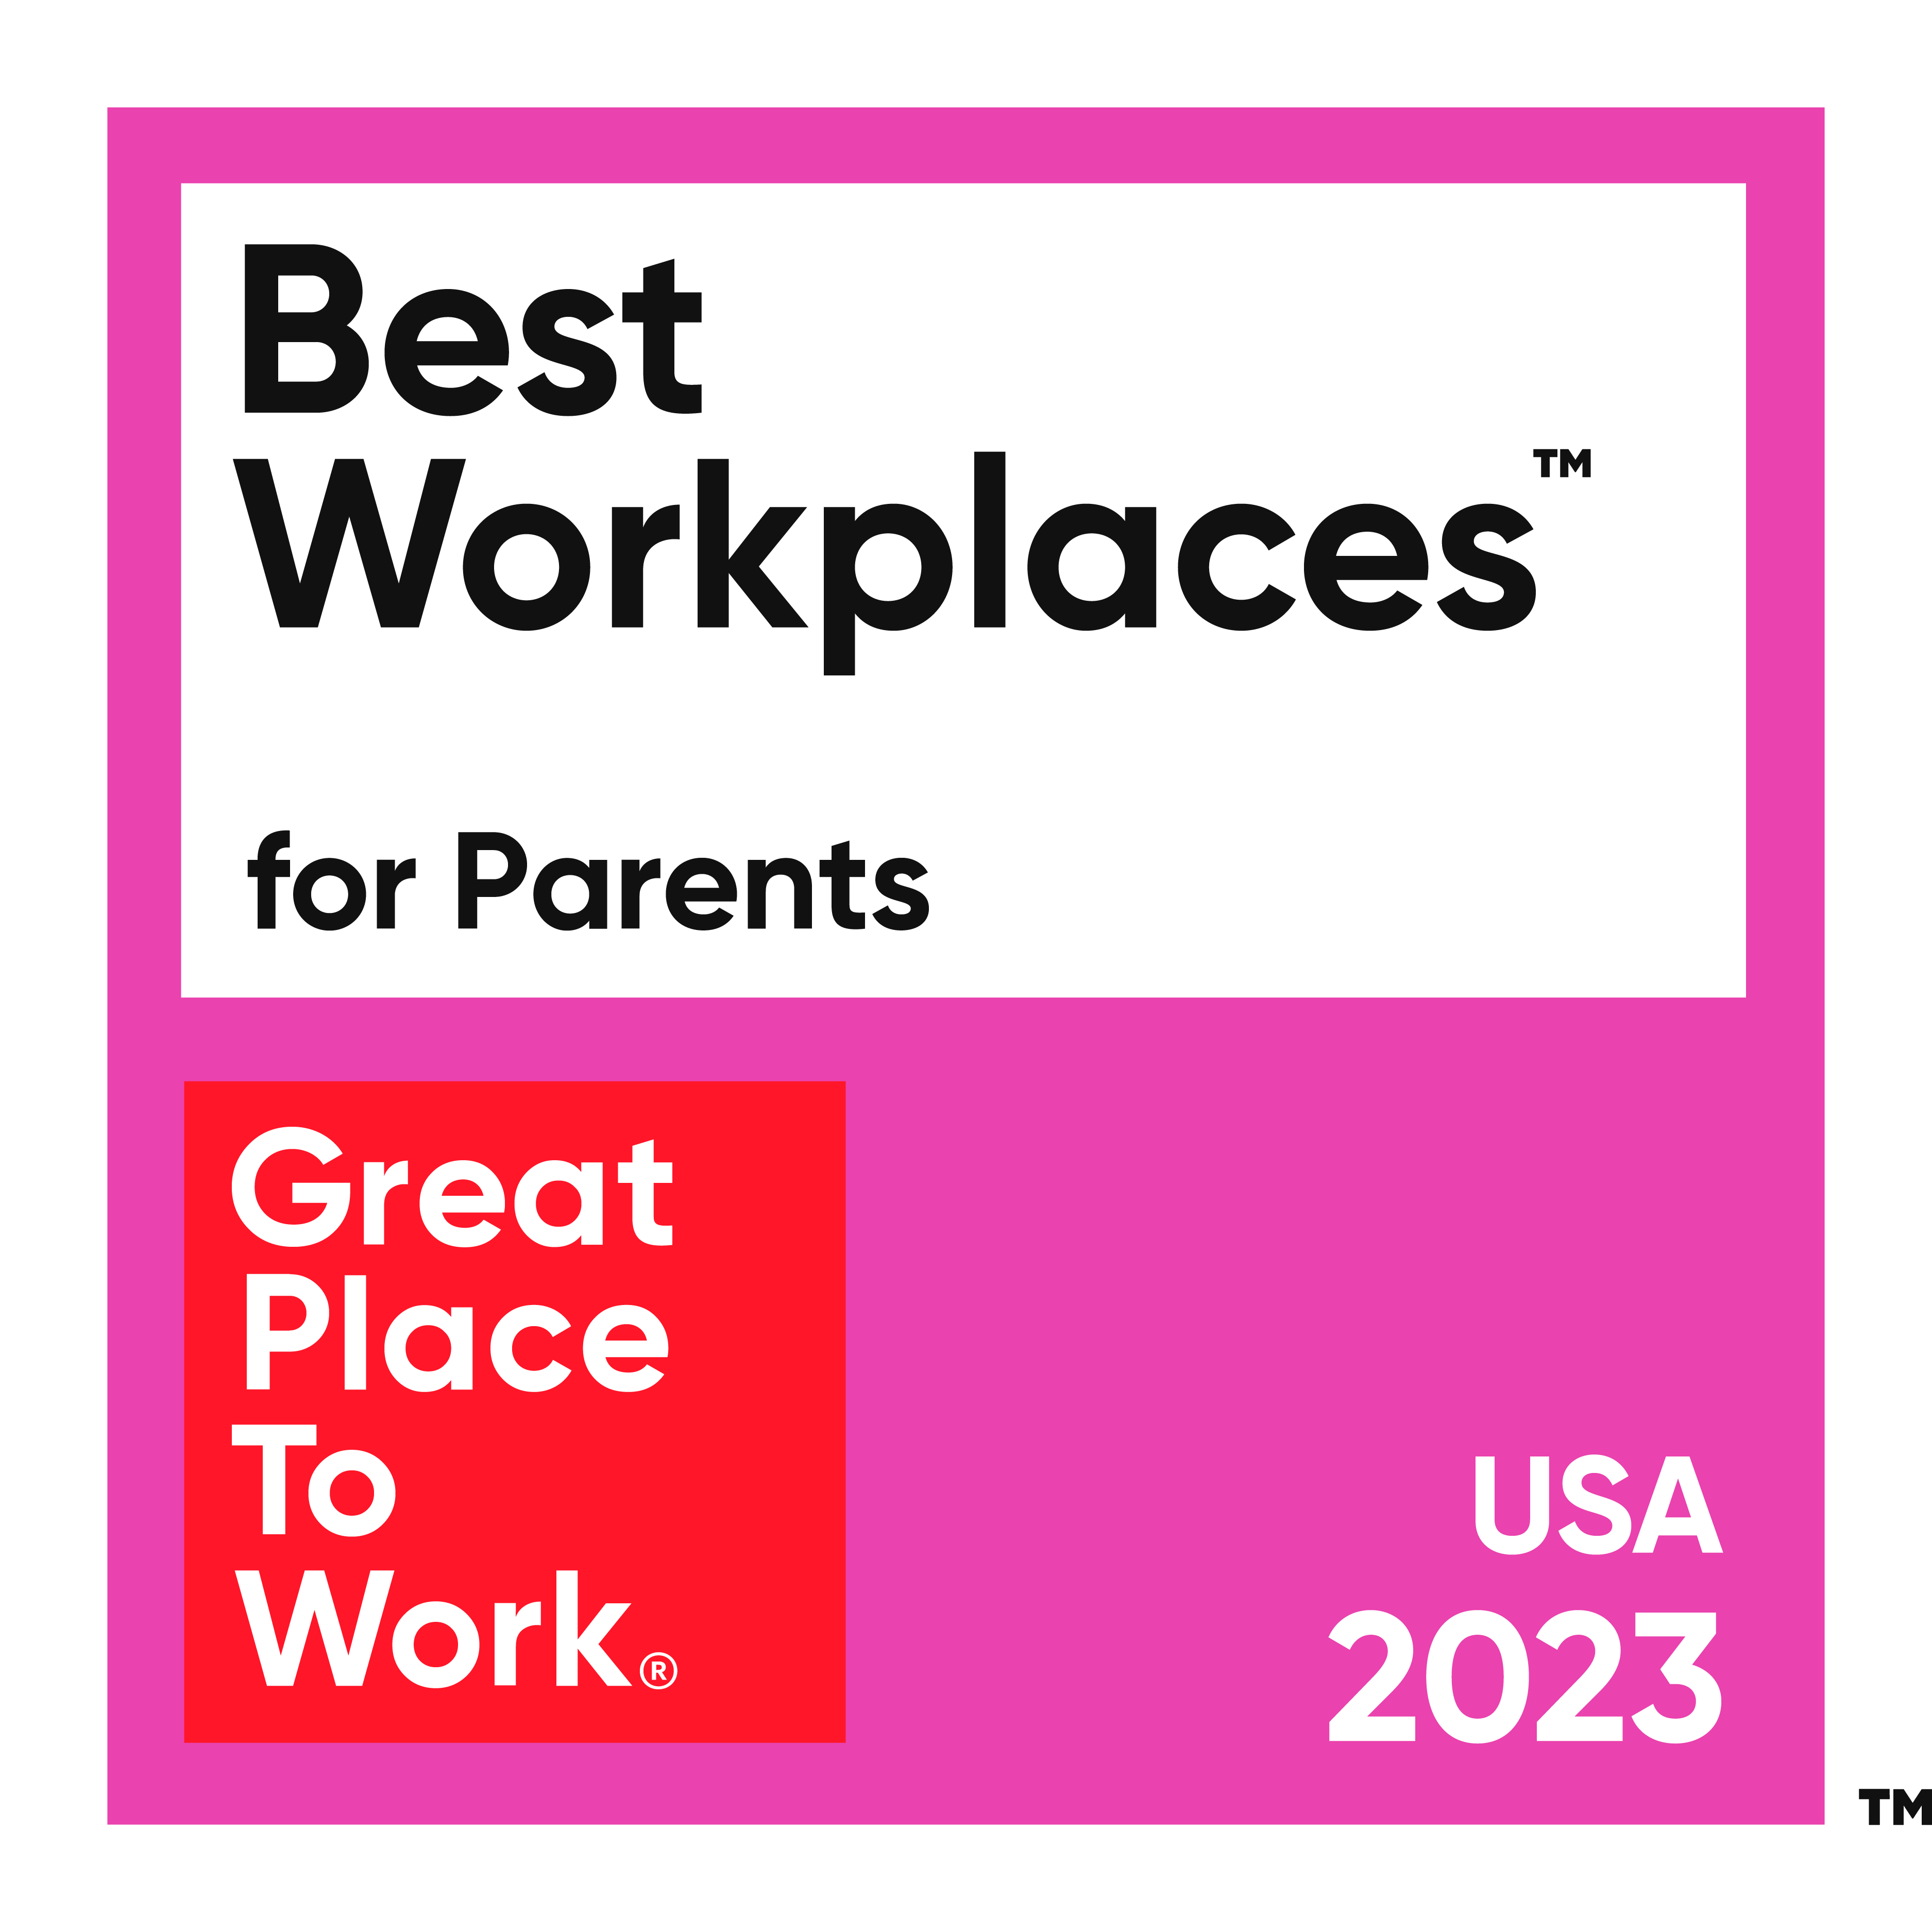 Best Workplaces for Parents. Great Place to Work, USA 2023